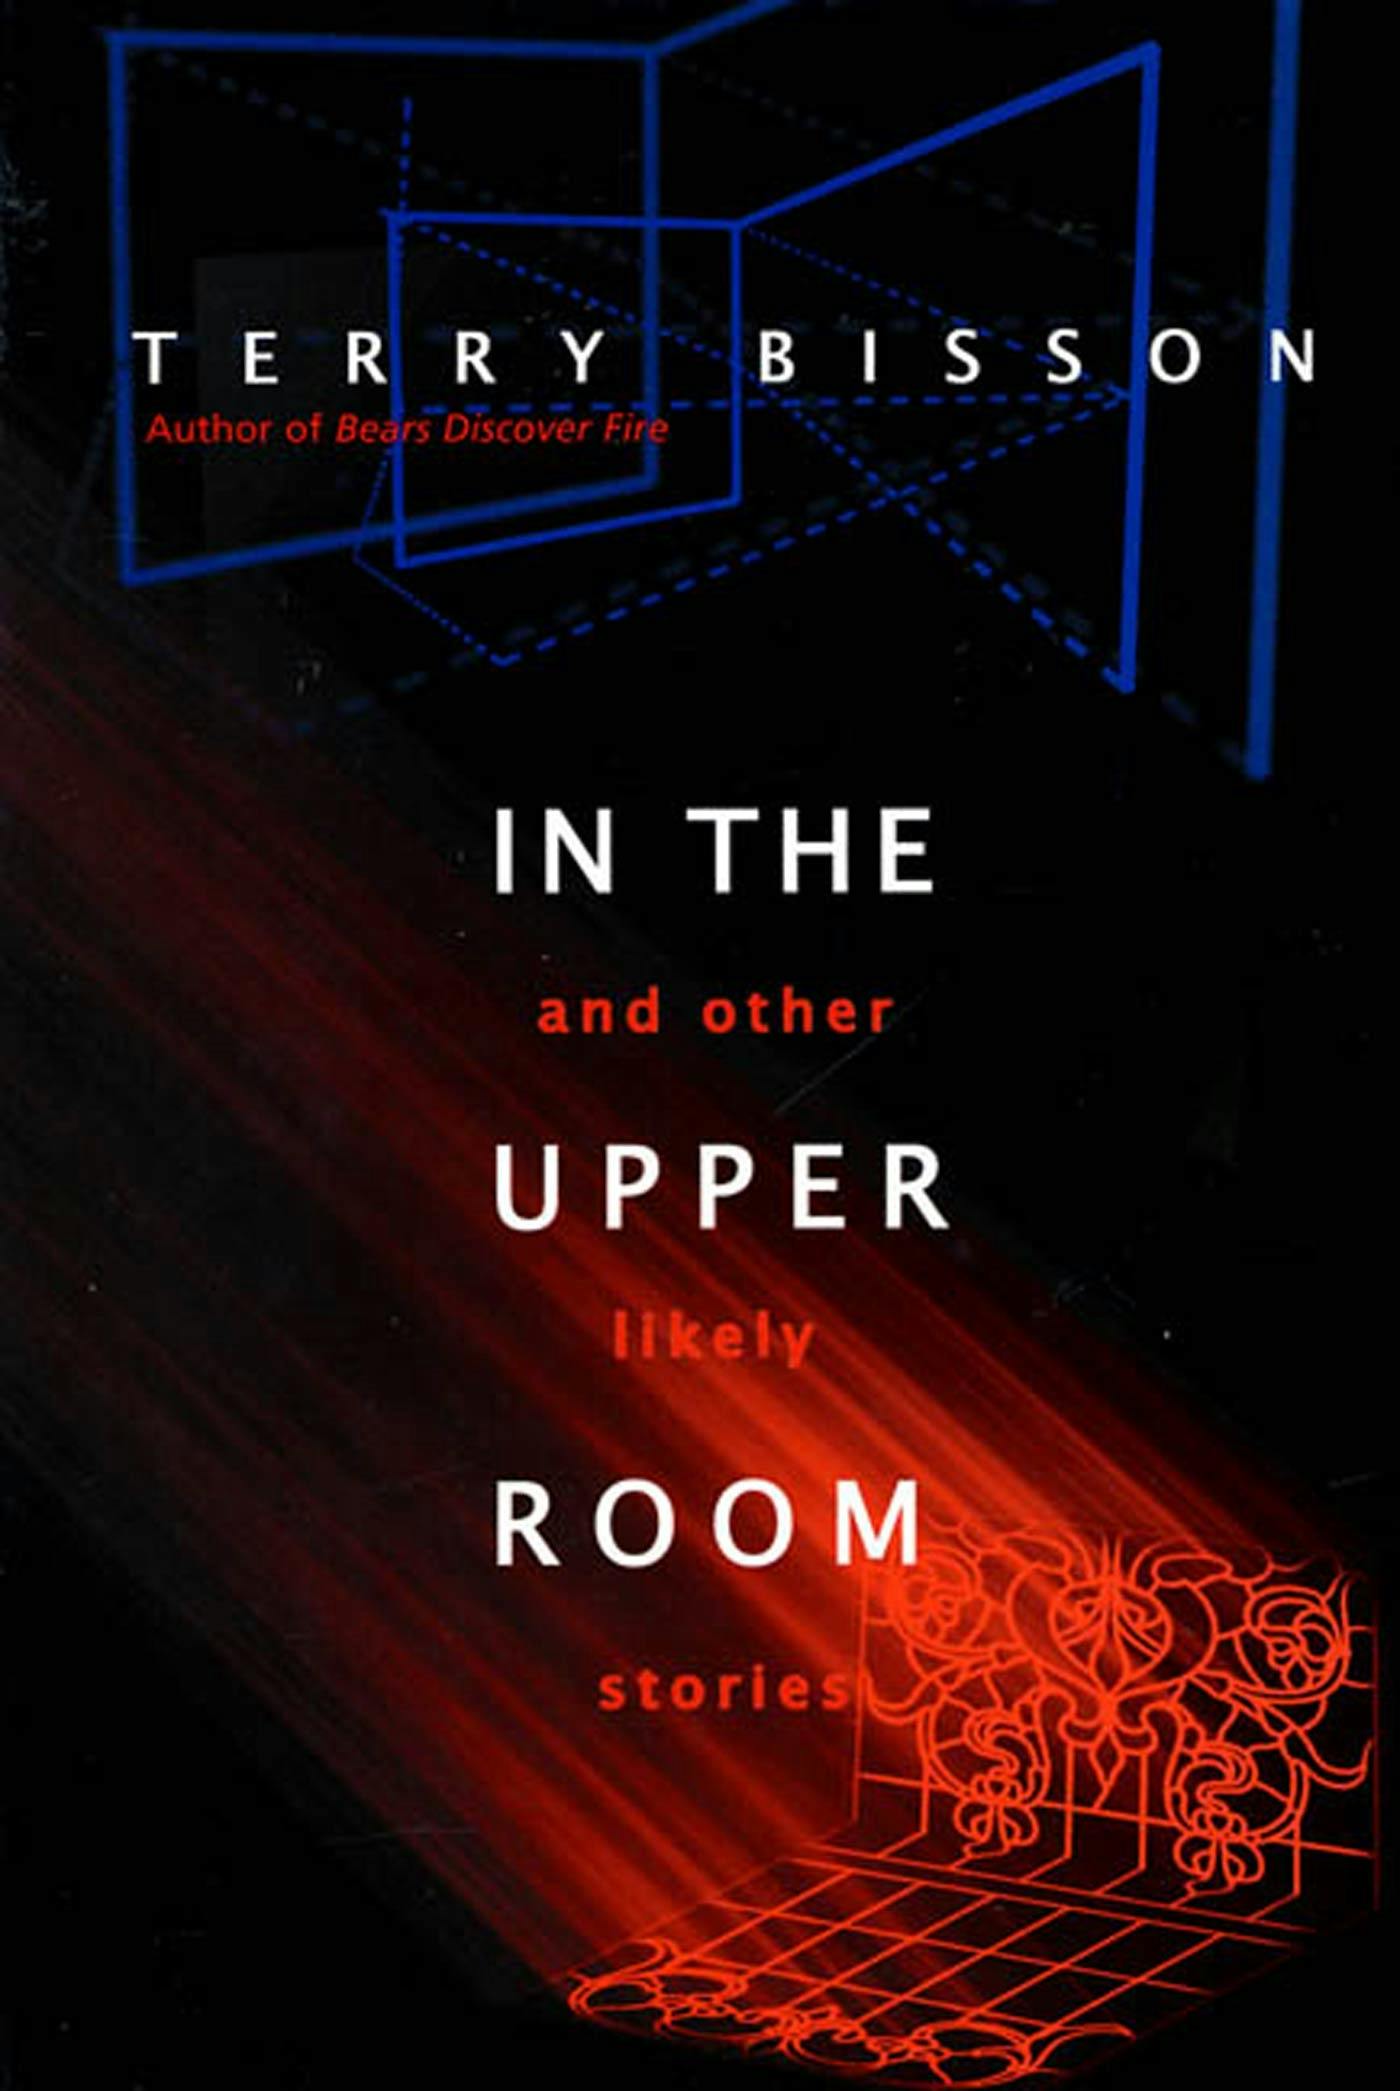 Cover for the book titled as: In the Upper Room and Other Likely Stories